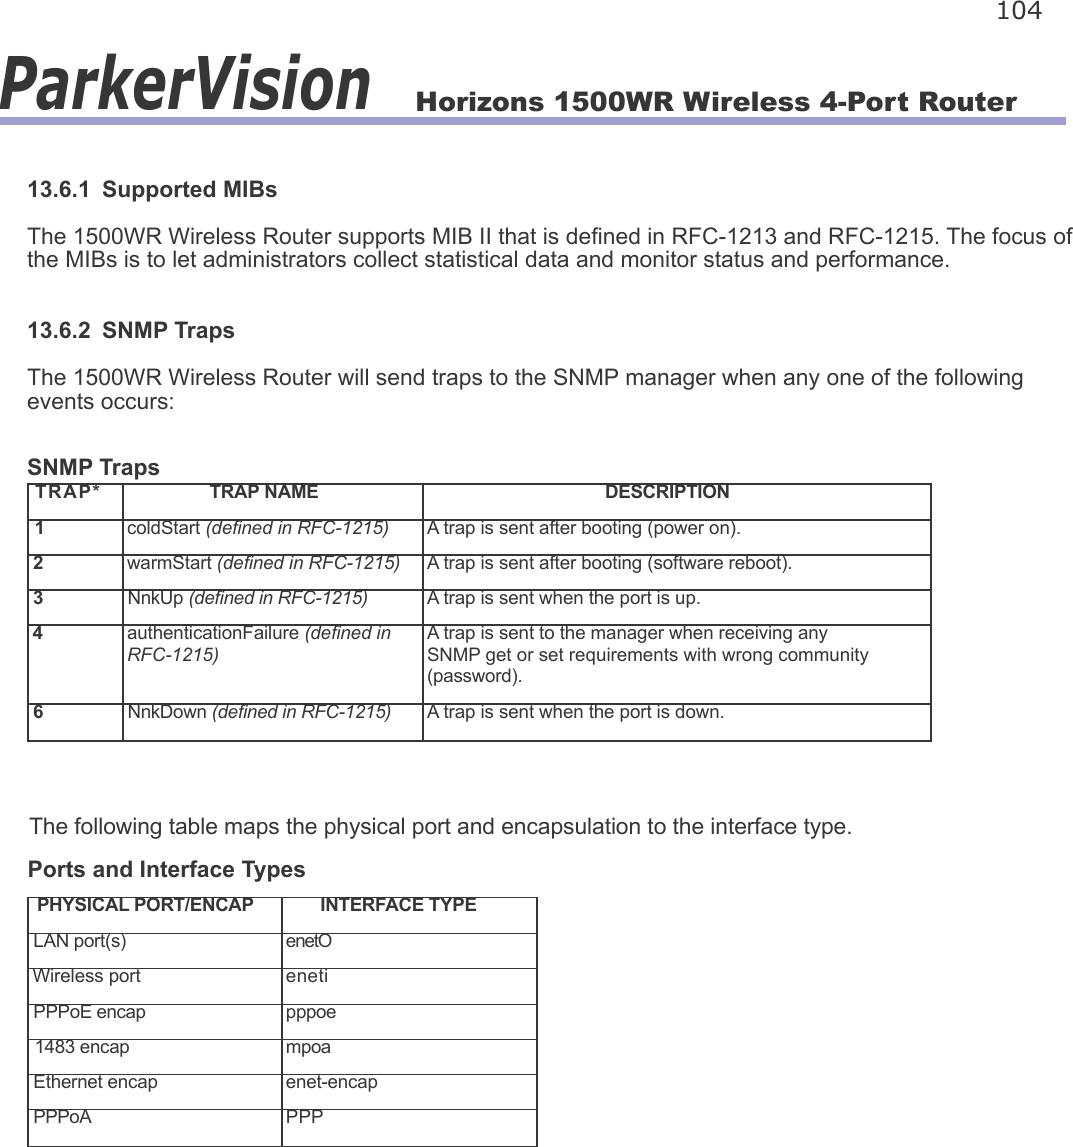 Horizons 1500WR Wireless 4-Port Router 104ParkerVision13.6.1  Supported MIBsThe 1500WR Wireless Router supports MIB II that is dened in RFC-1213 and RFC-1215. The focus of the MIBs is to let administrators collect statistical data and monitor status and performance.13.6.2  SNMP TrapsThe 1500WR Wireless Router will send traps to the SNMP manager when any one of the following events occurs:SNMP TrapsTRAP* TRAP NAME DESCRIPTION1coldStart (dened in RFC-1215) A trap is sent after booting (power on).2warmStart (dened in RFC-1215) A trap is sent after booting (software reboot).3NnkUp (dened in RFC-1215) A trap is sent when the port is up.4authenticationFailure (dened in RFC-1215)A trap is sent to the manager when receiving any SNMP get or set requirements with wrong community (password).6NnkDown (dened in RFC-1215) A trap is sent when the port is down.The following table maps the physical port and encapsulation to the interface type.Ports and Interface TypesPHYSICAL PORT/ENCAP INTERFACE TYPELAN port(s) enetOWireless port enetiPPPoE encap pppoe1483 encap mpoaEthernet encap enet-encapPPPoA PPP